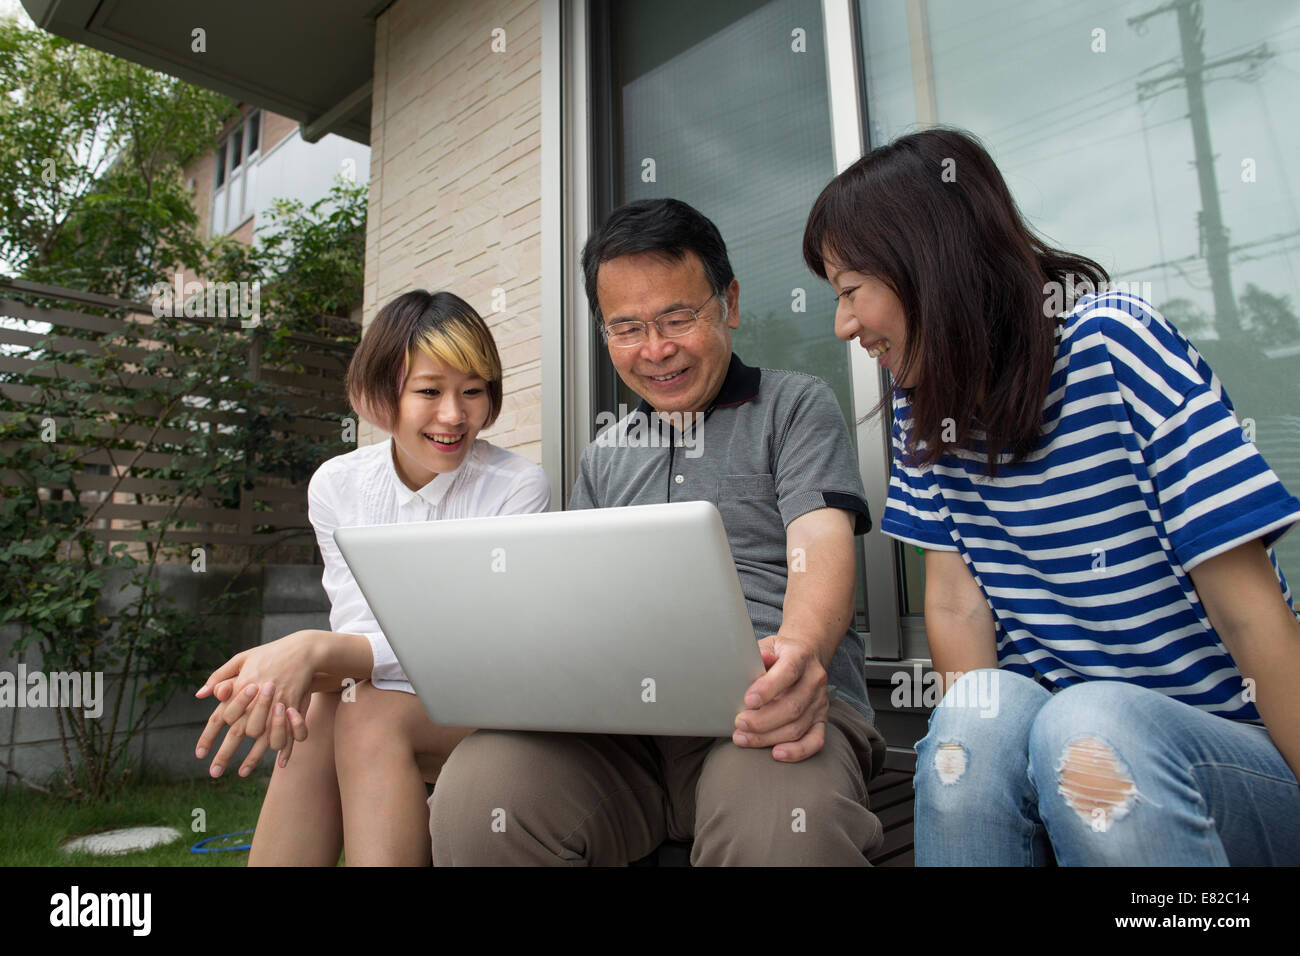 A man and two women sitting outside a house. Holding a laptop computer. Stock Photo